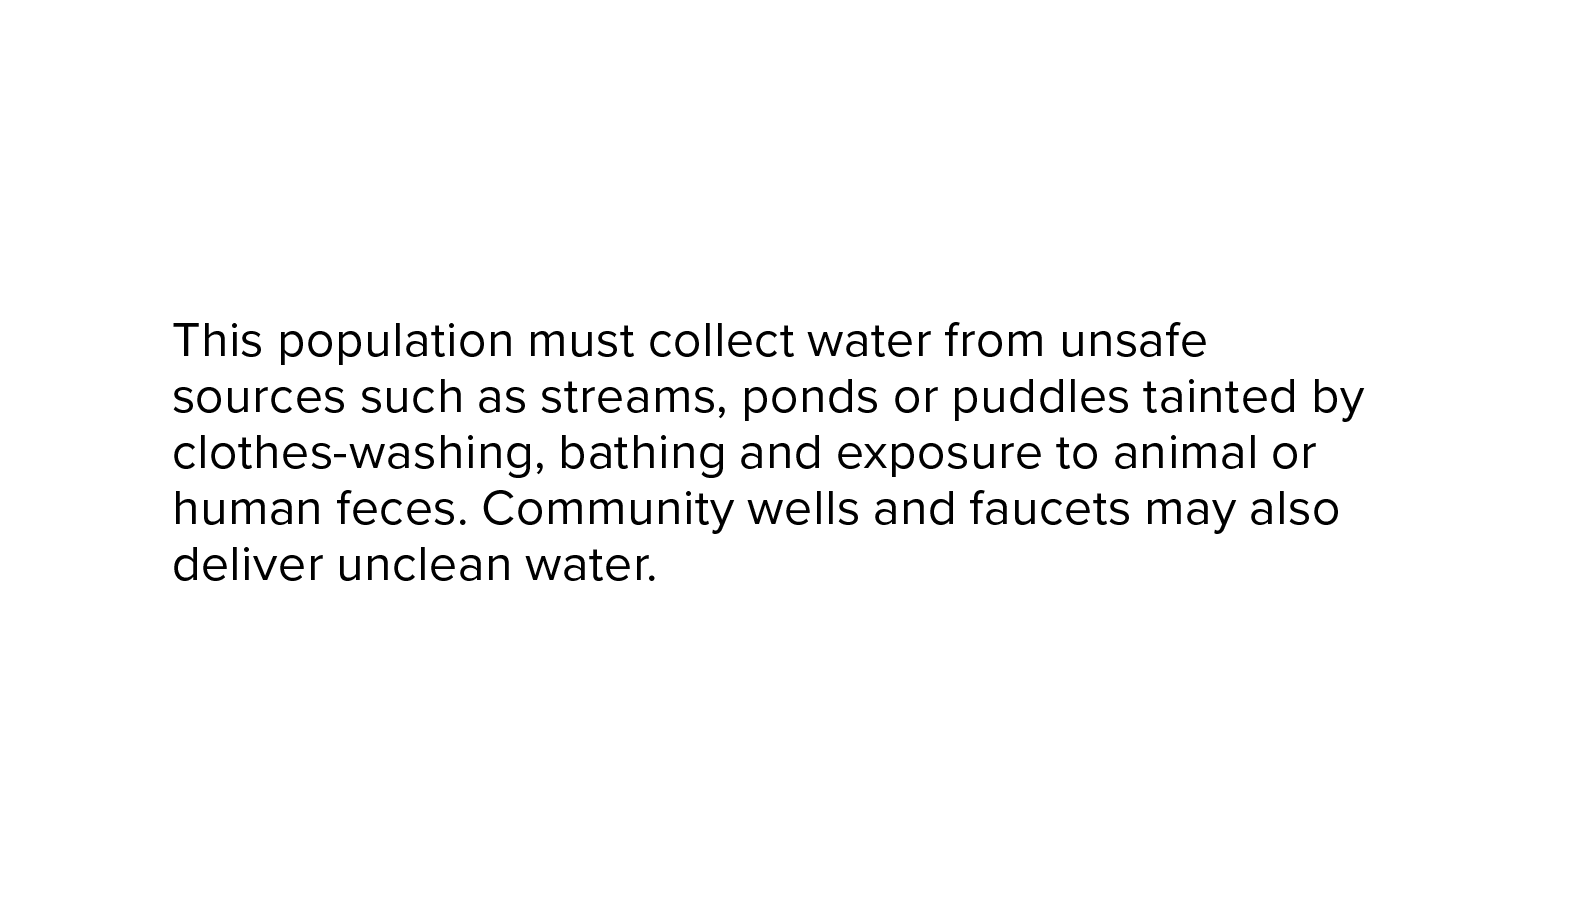 This population must collect water from unsafe sources such as streams, ponds or puddles tainted by clothes-washing, bathing and exposure to animal or human feces. Community wells and faucets may also deliver unclean water.